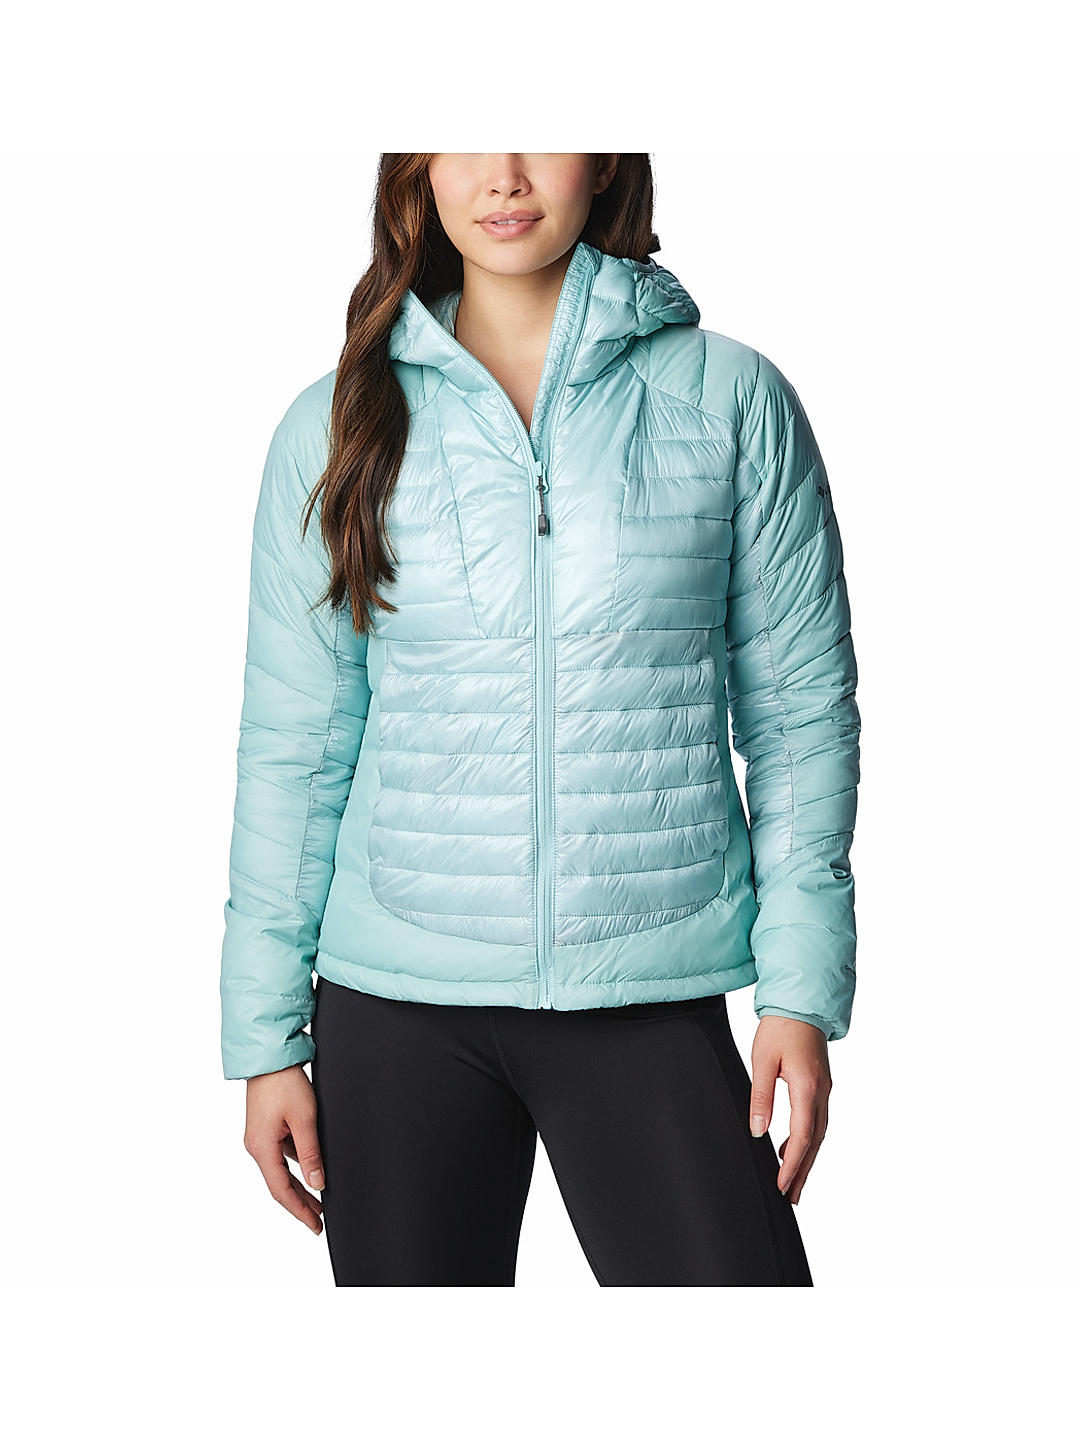 Patagonia Airshed Pro Pullover - Women's Review | Tested by GearLab